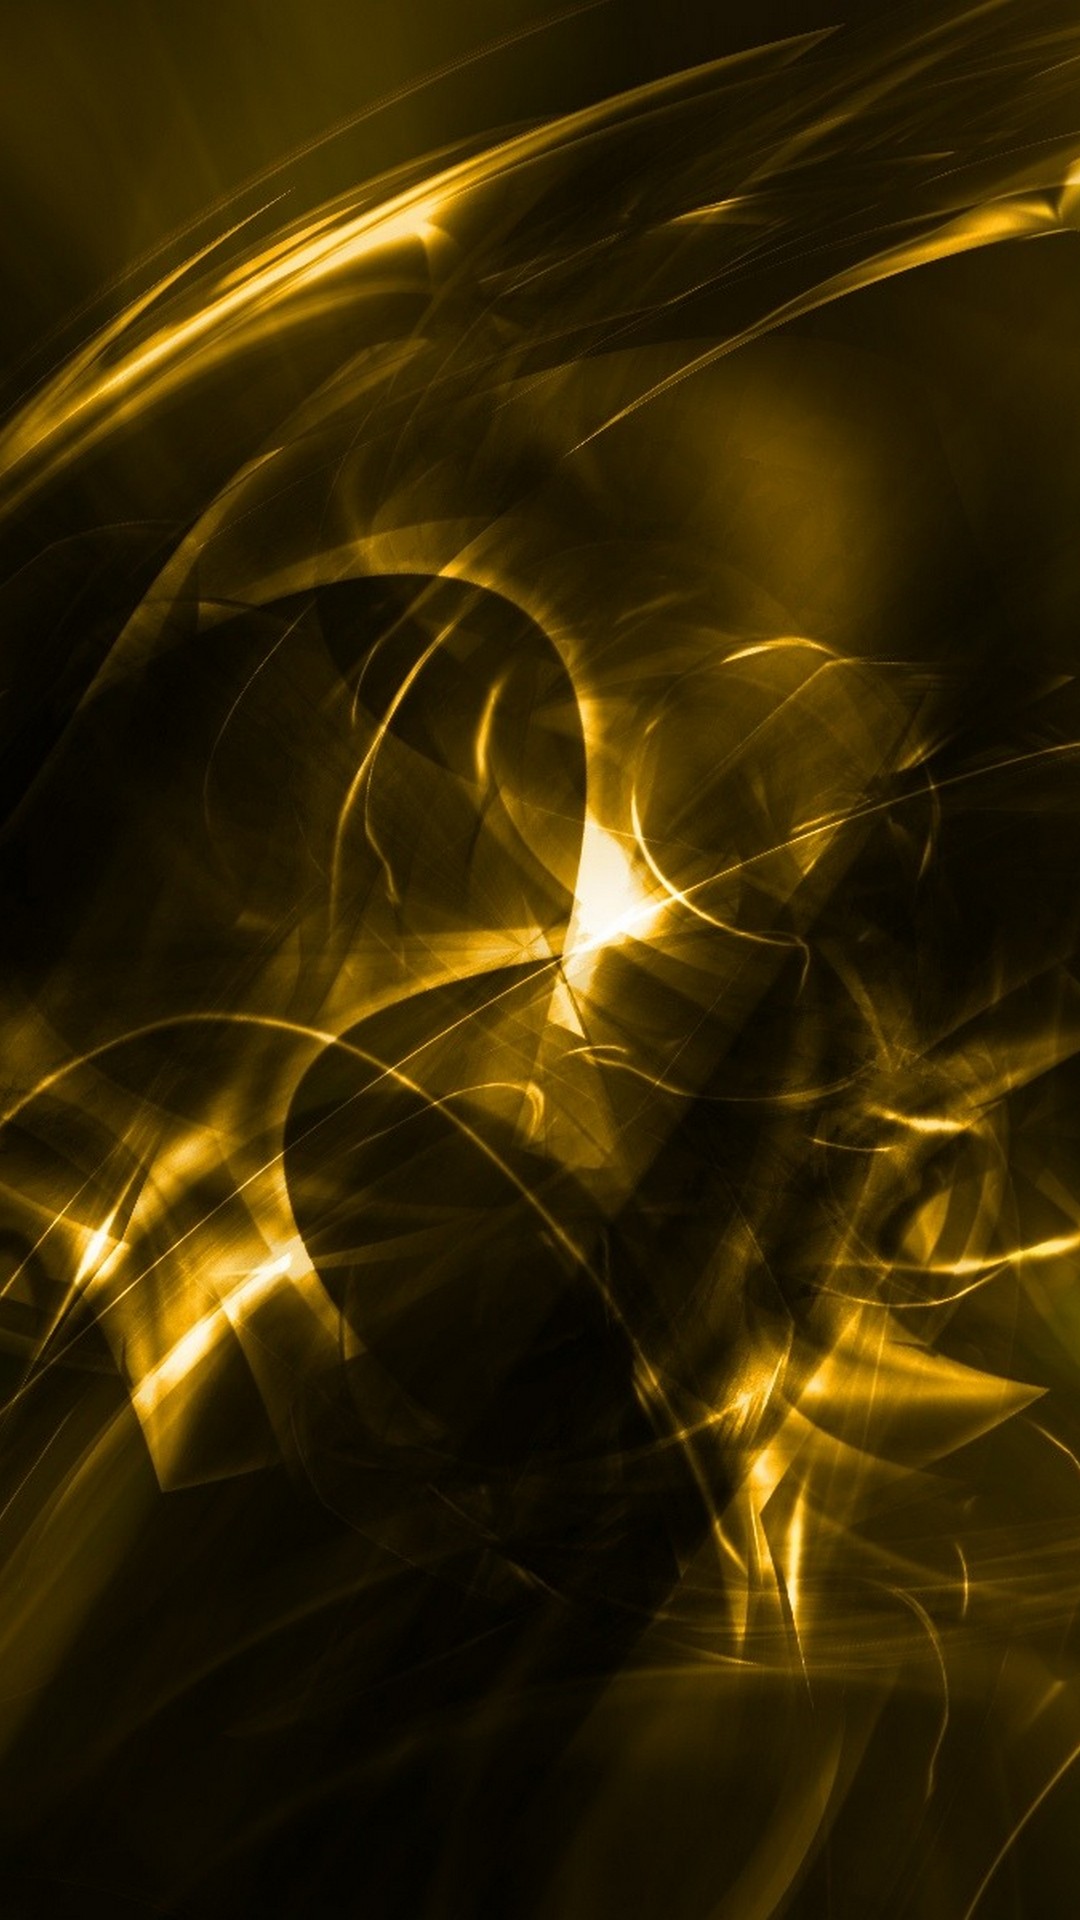 Black and Gold Wallpaper For Android with HD resolution 1080x1920